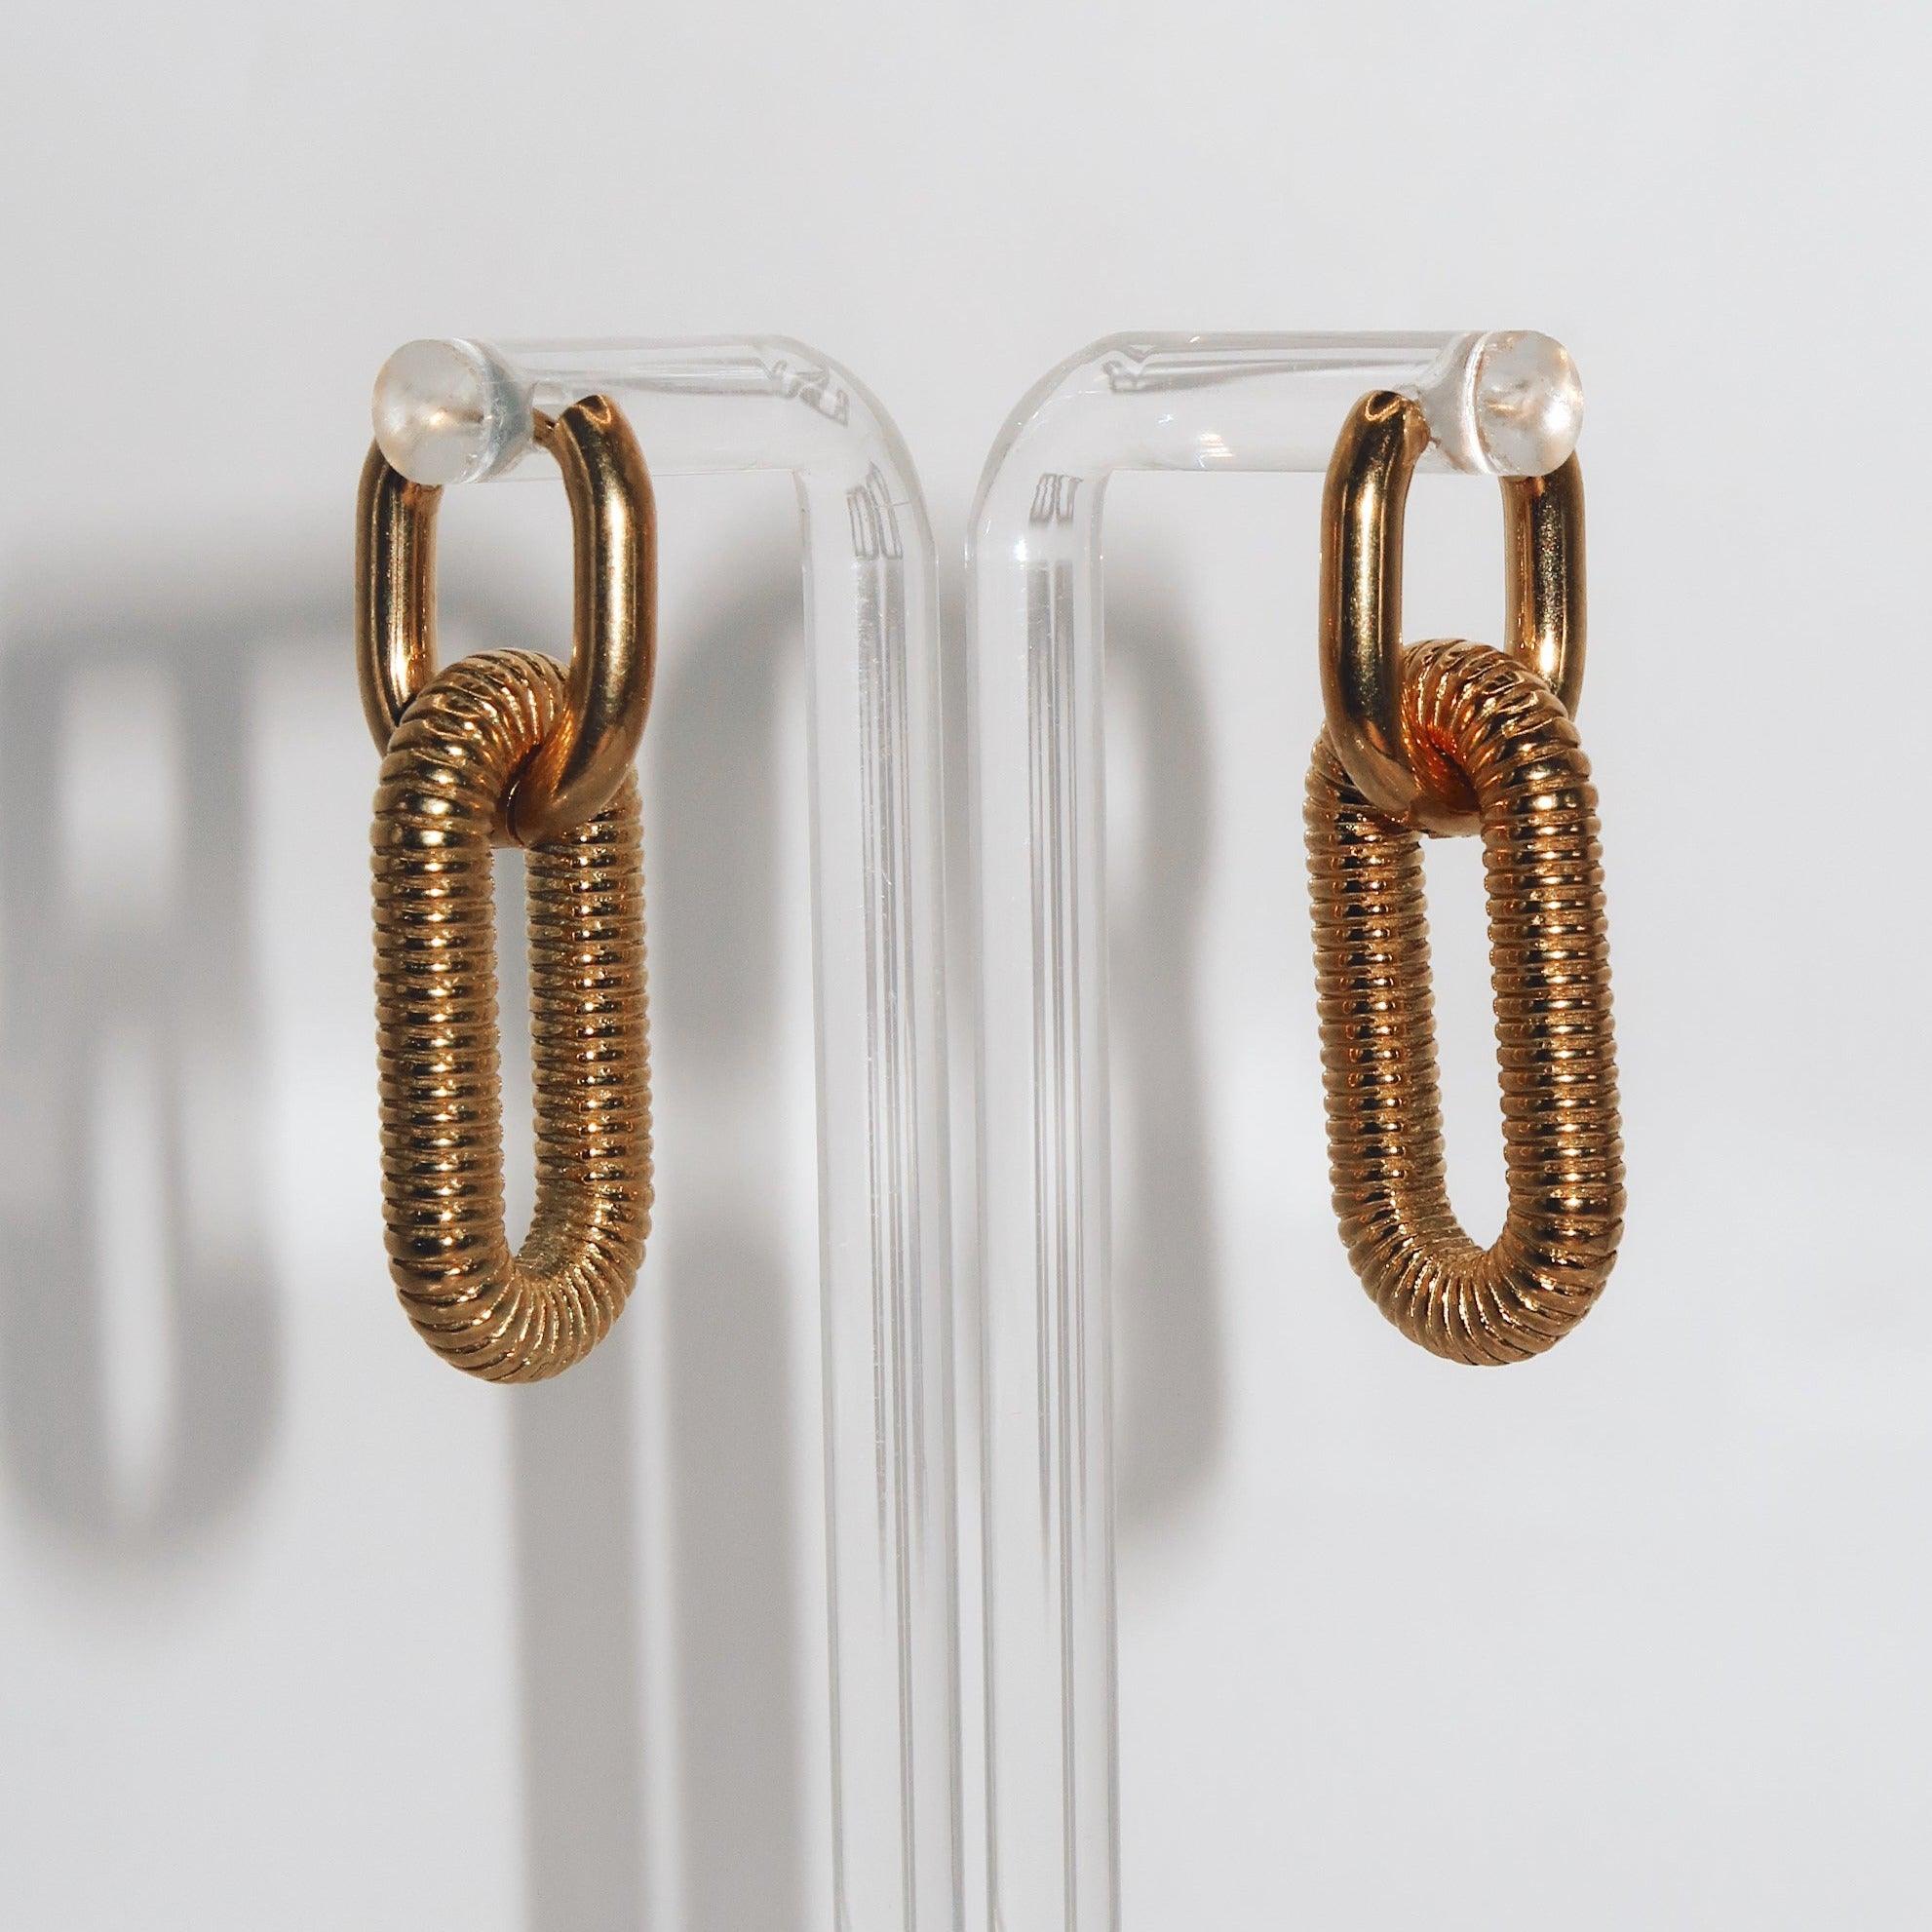 CARMEN - 18K PVD Gold Plated Convertible Oval Hoop Earrings - Mixed Metals